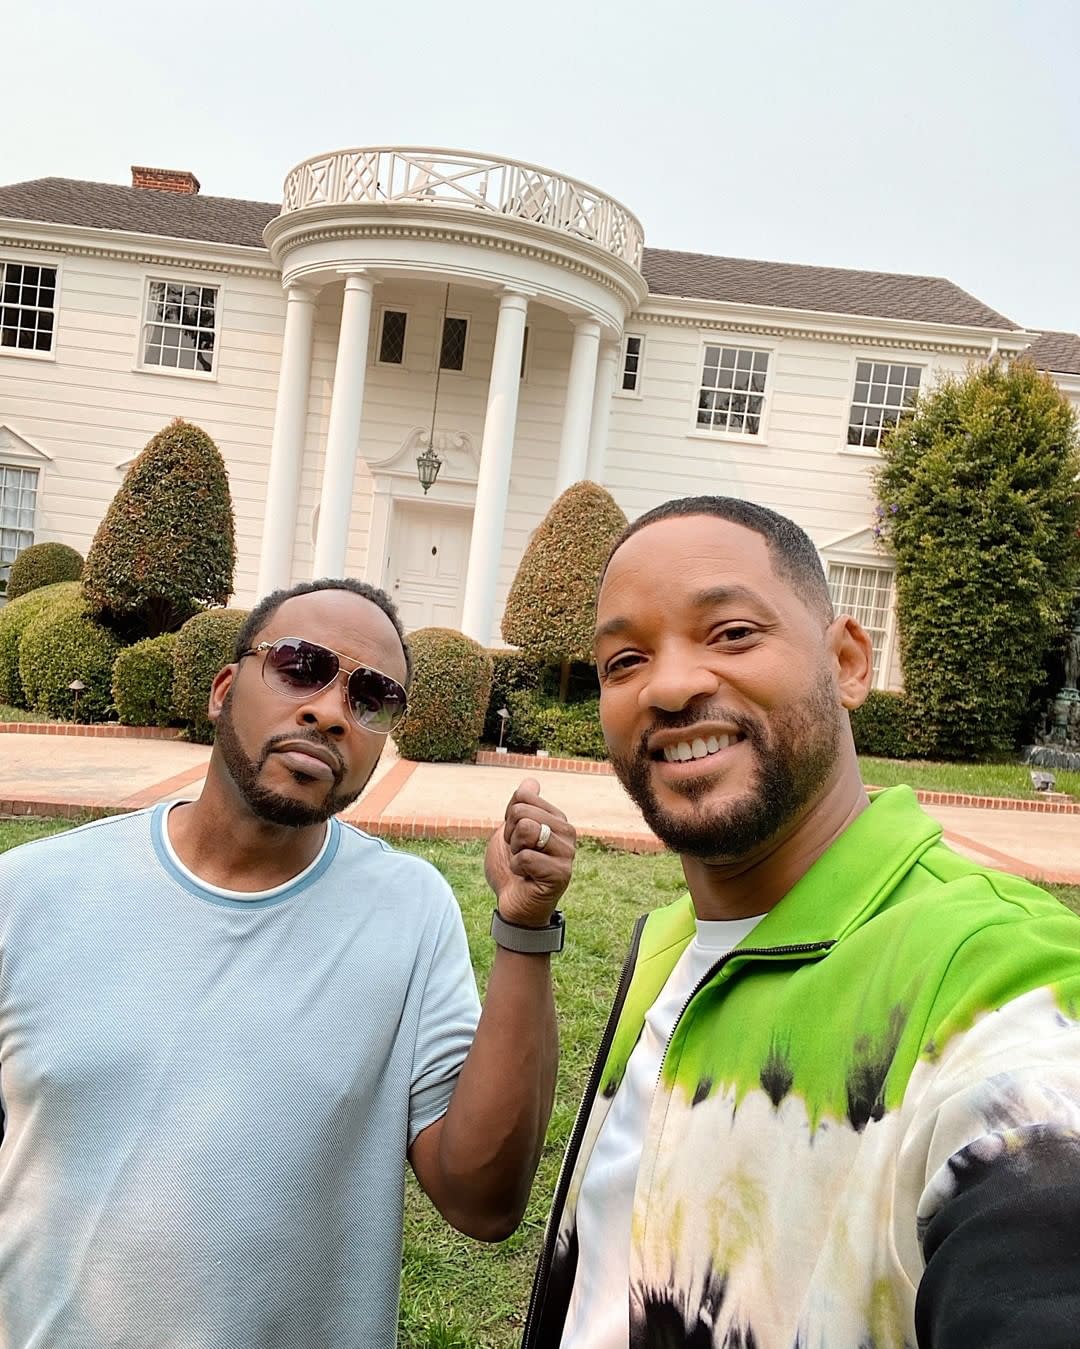 DJ Jazzy Jeff and Will Smith team up to put the "Fresh Prince of Bel-Air" mansion on Airbnb. (Photo: Instagram/Will Smith)